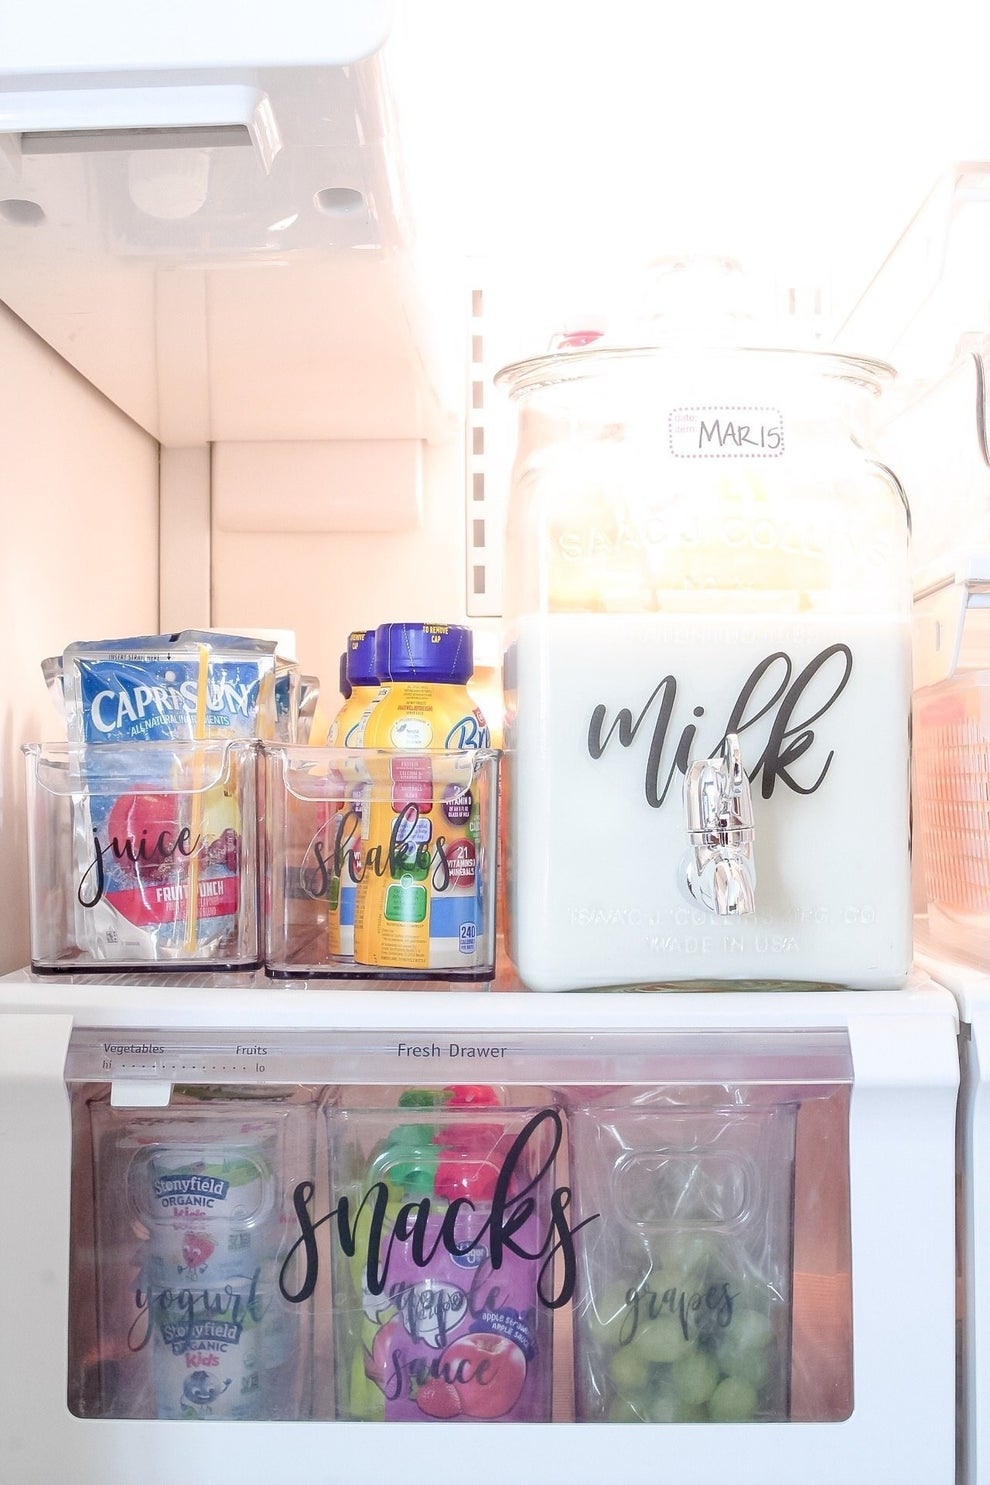 Roundup: 10 Ways to Gain More Storage in Your Refrigerator - Curbly